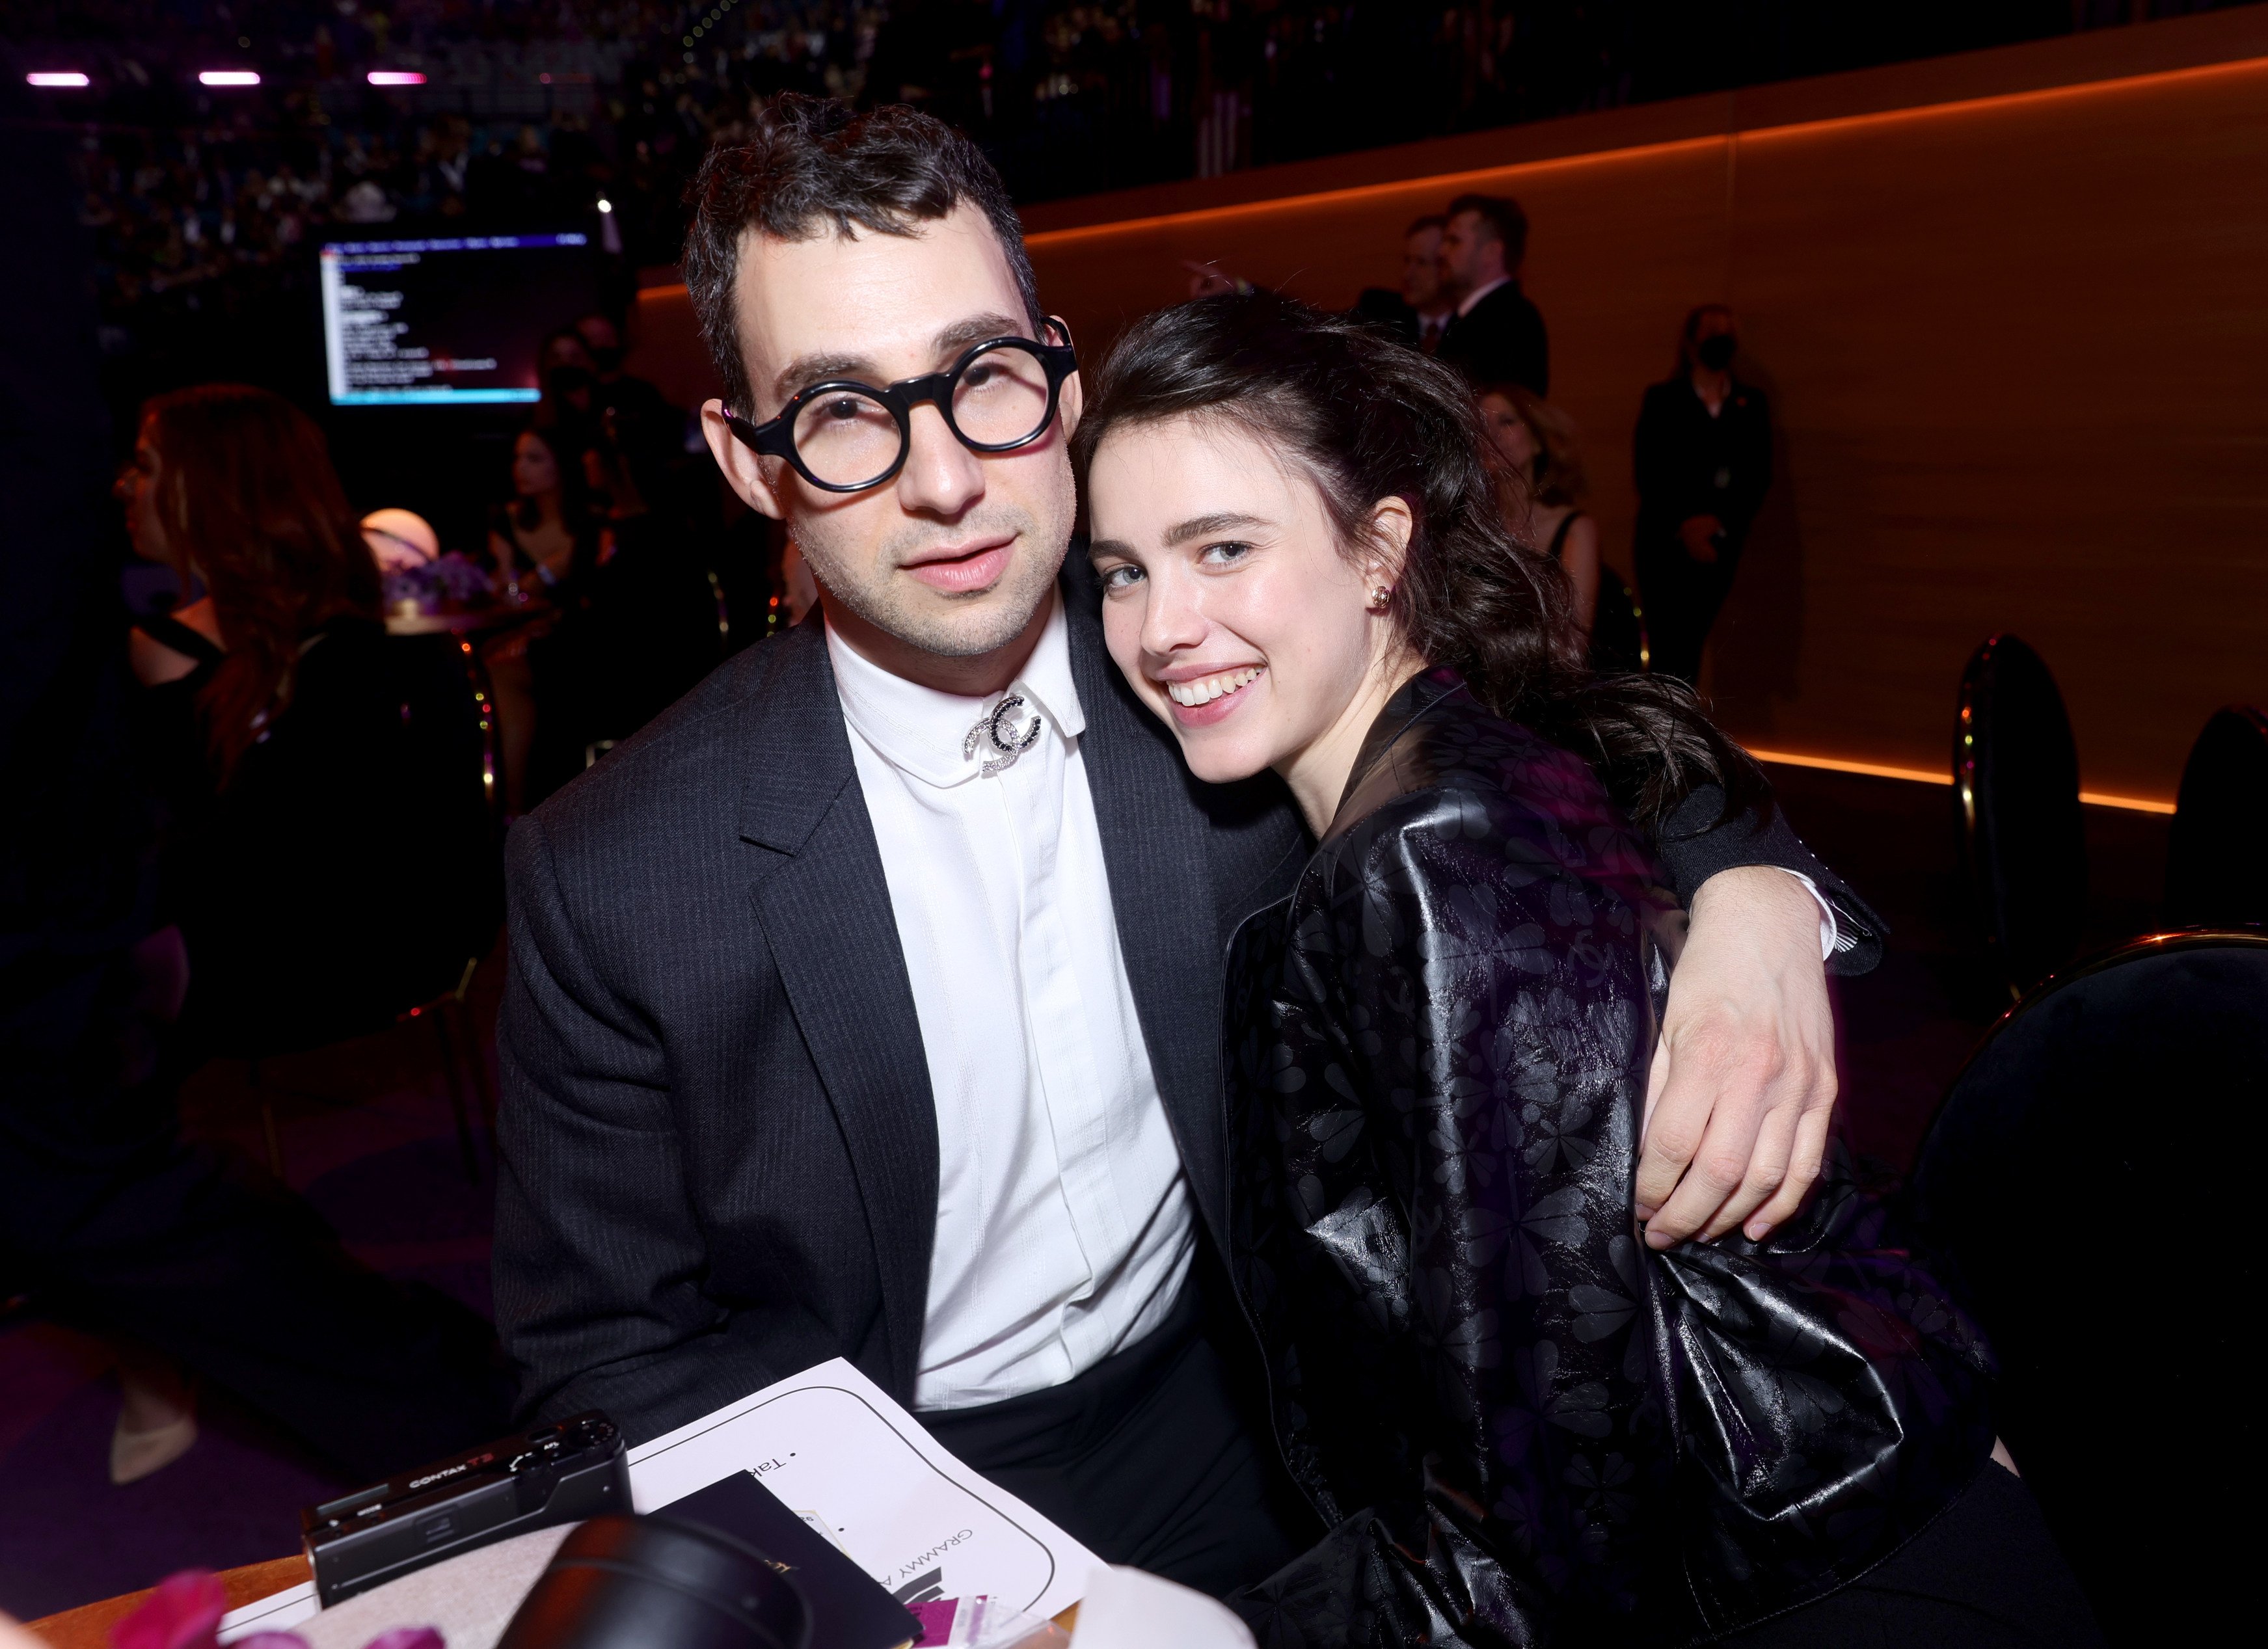 Jack Antonoff and Margaret Qualley at the 64th Annual Grammy Awards at MGM Grand Garden Arena in Las Vegas, Nevada, in April 2022. Photo: Getty Images